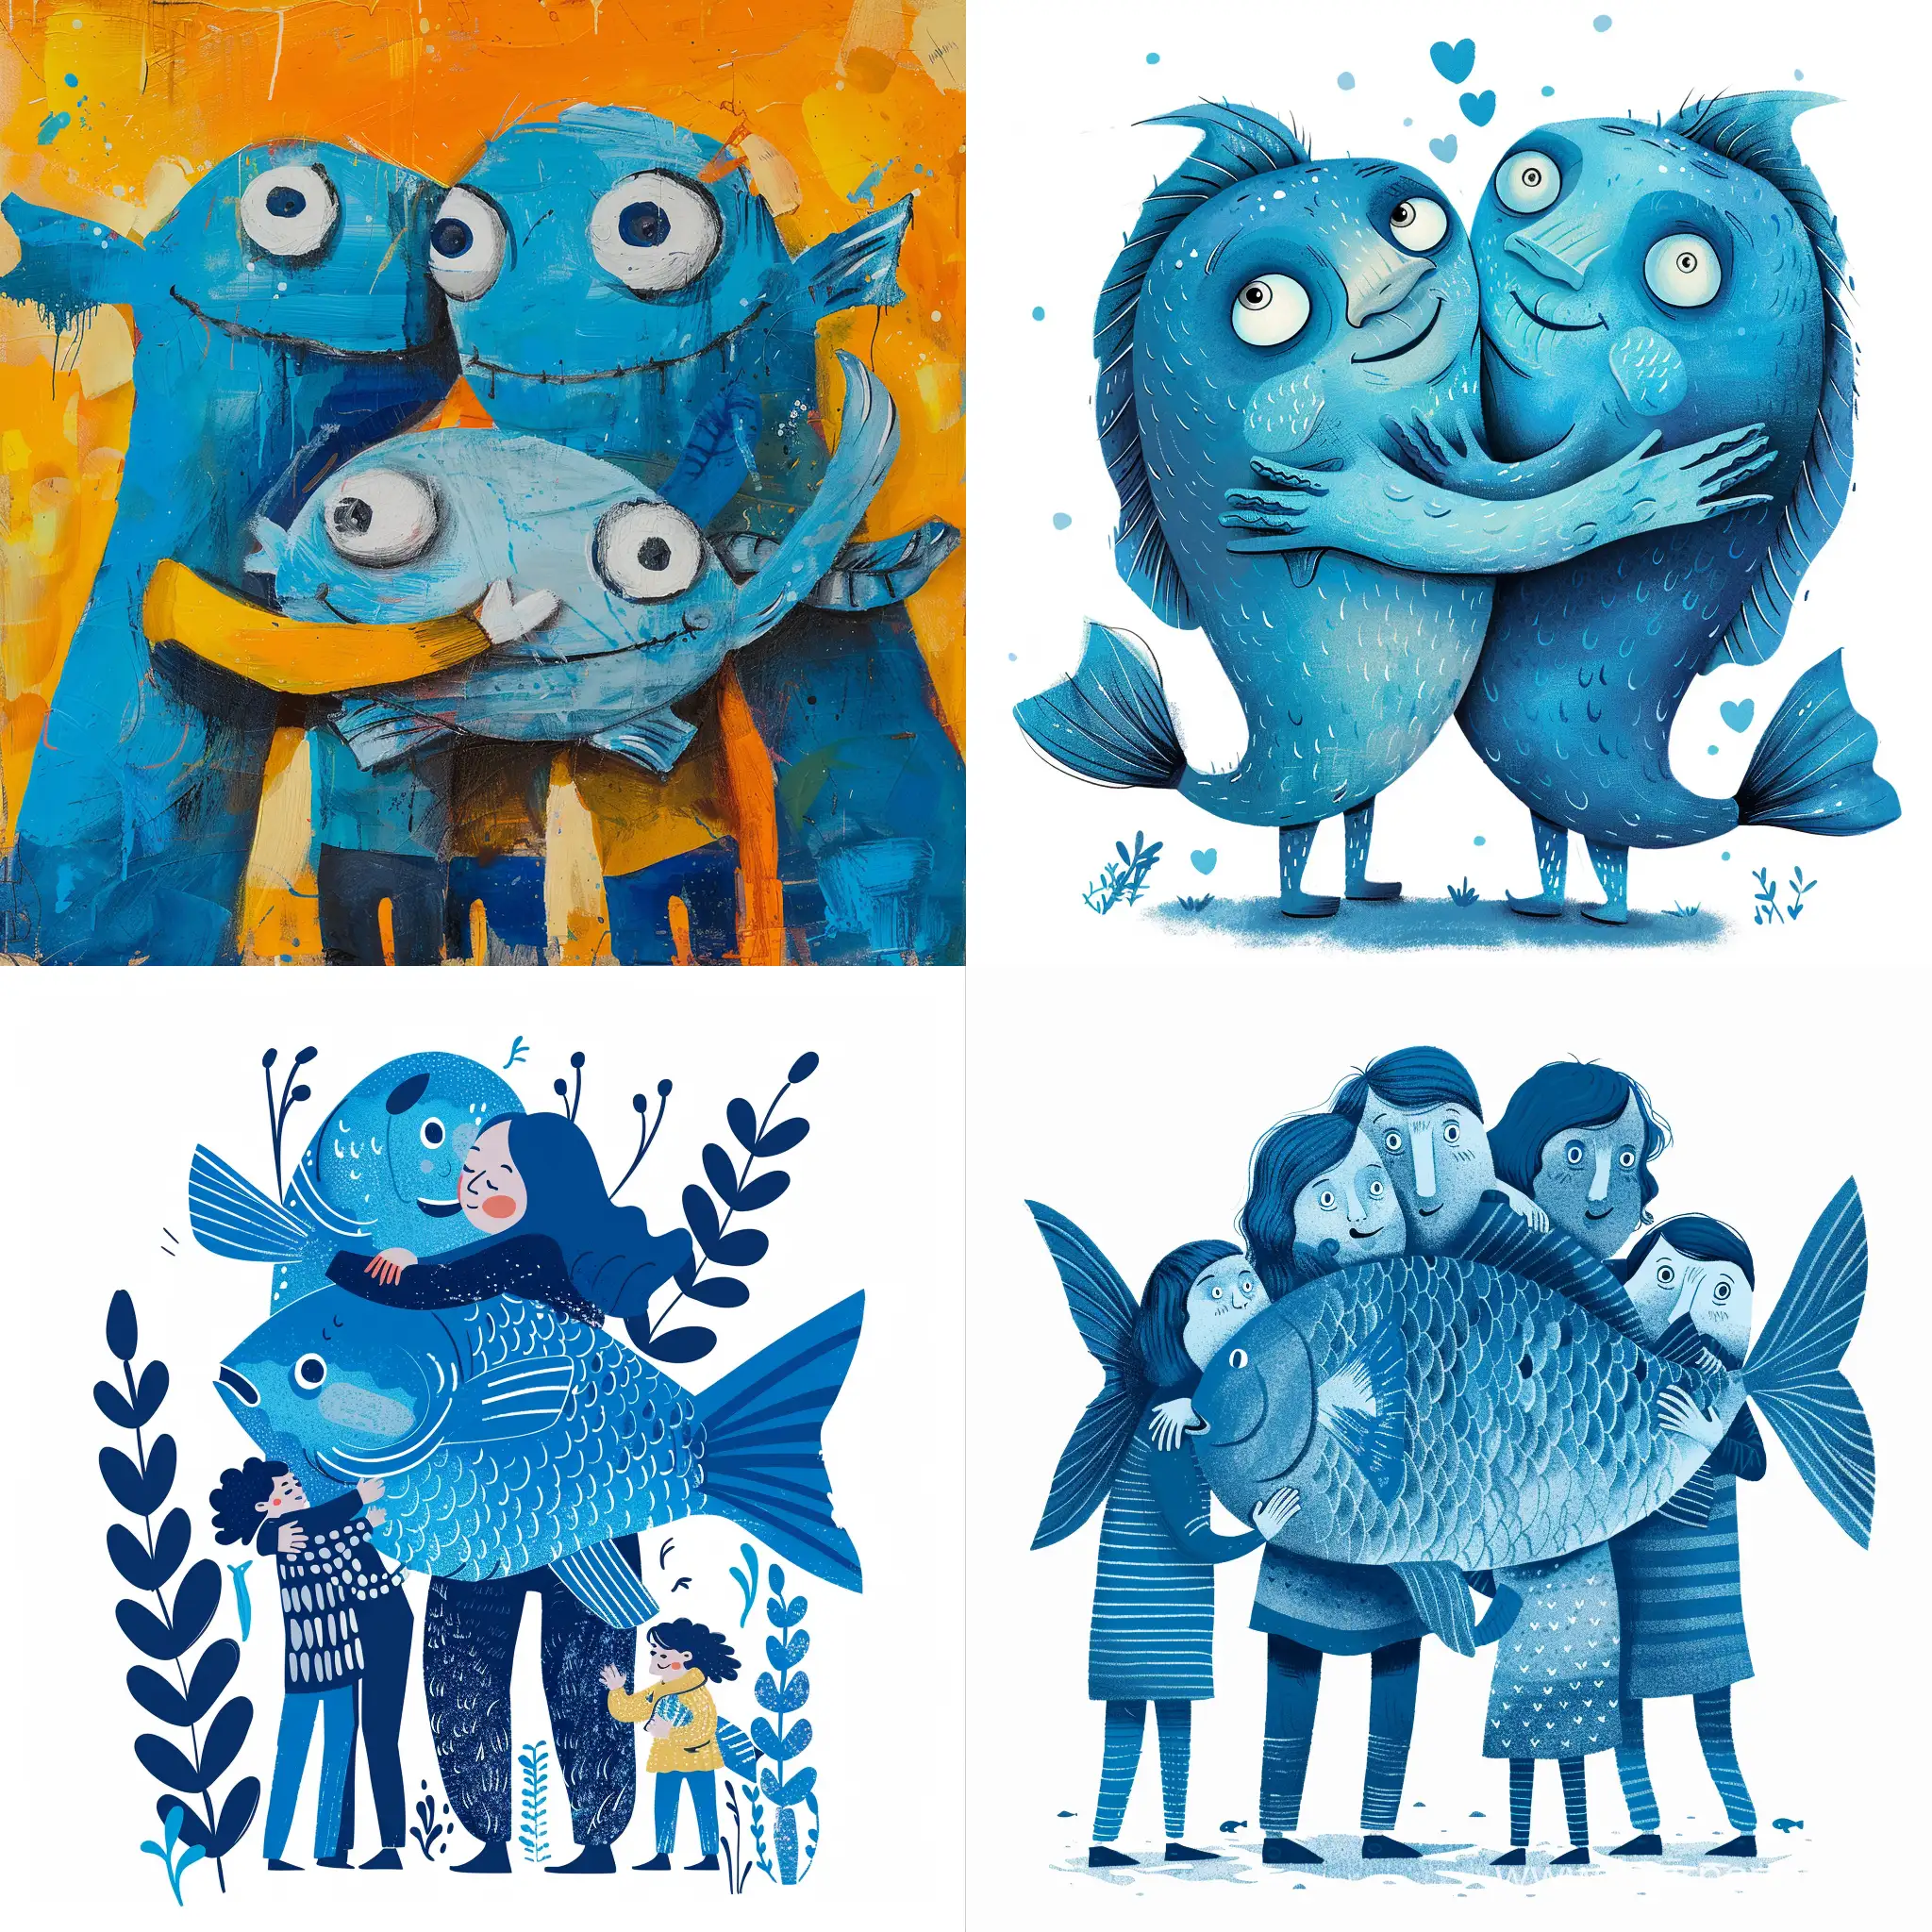 Blue fish hugging people in a friendly way